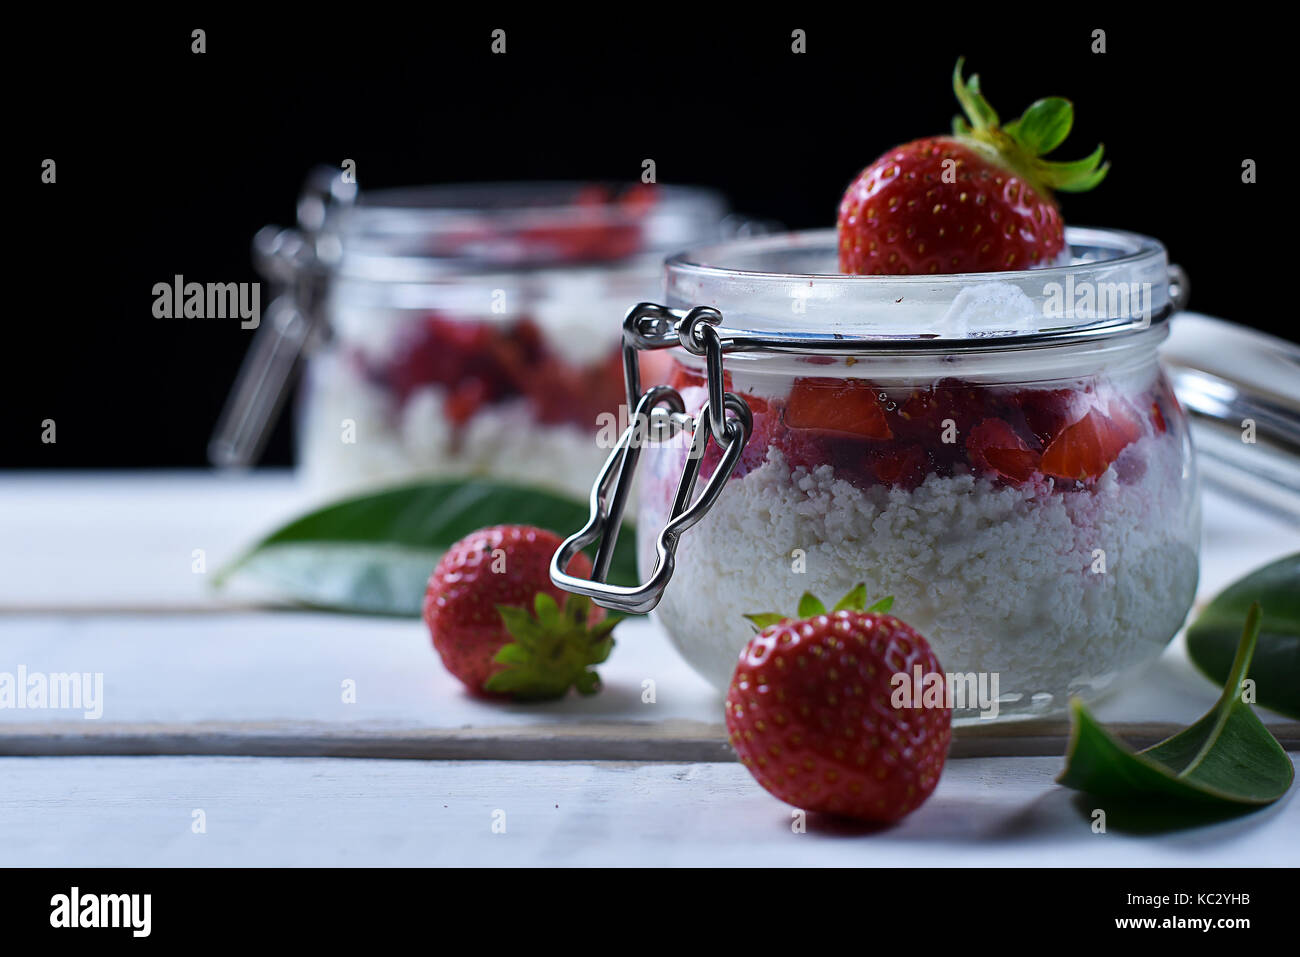 Strawberry dessert on the table Stock Photo